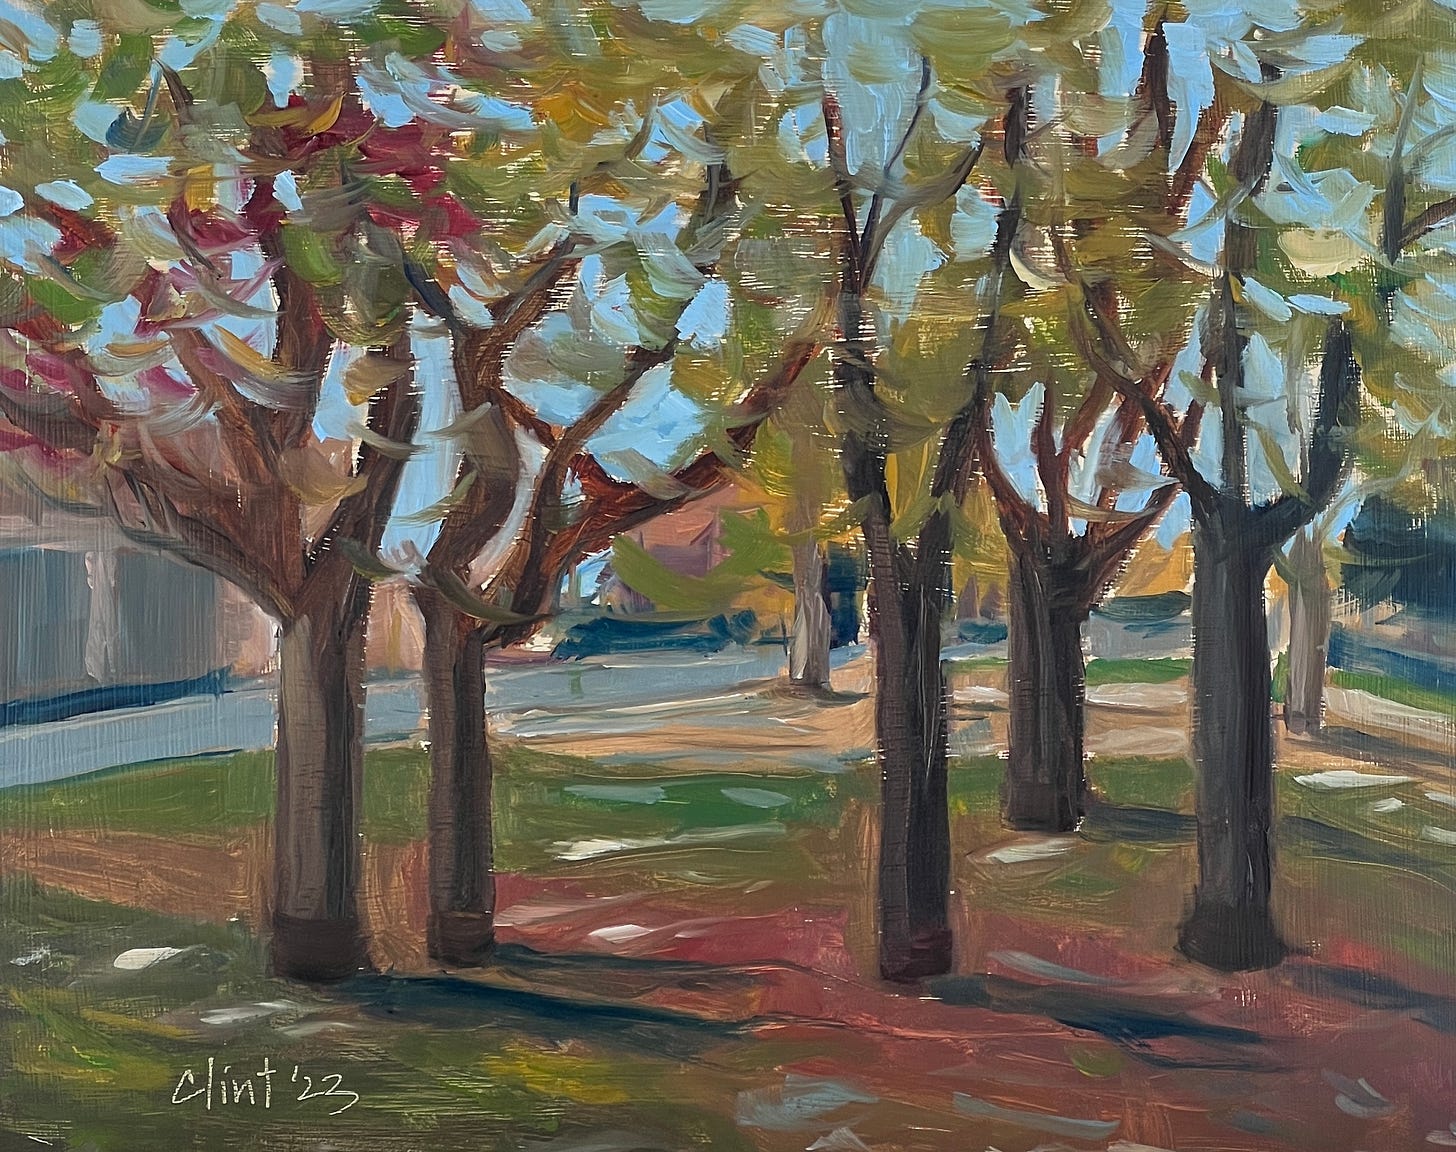 An oil painting showing five trees with autumn foliage in a park with light casting shadows on the ground.